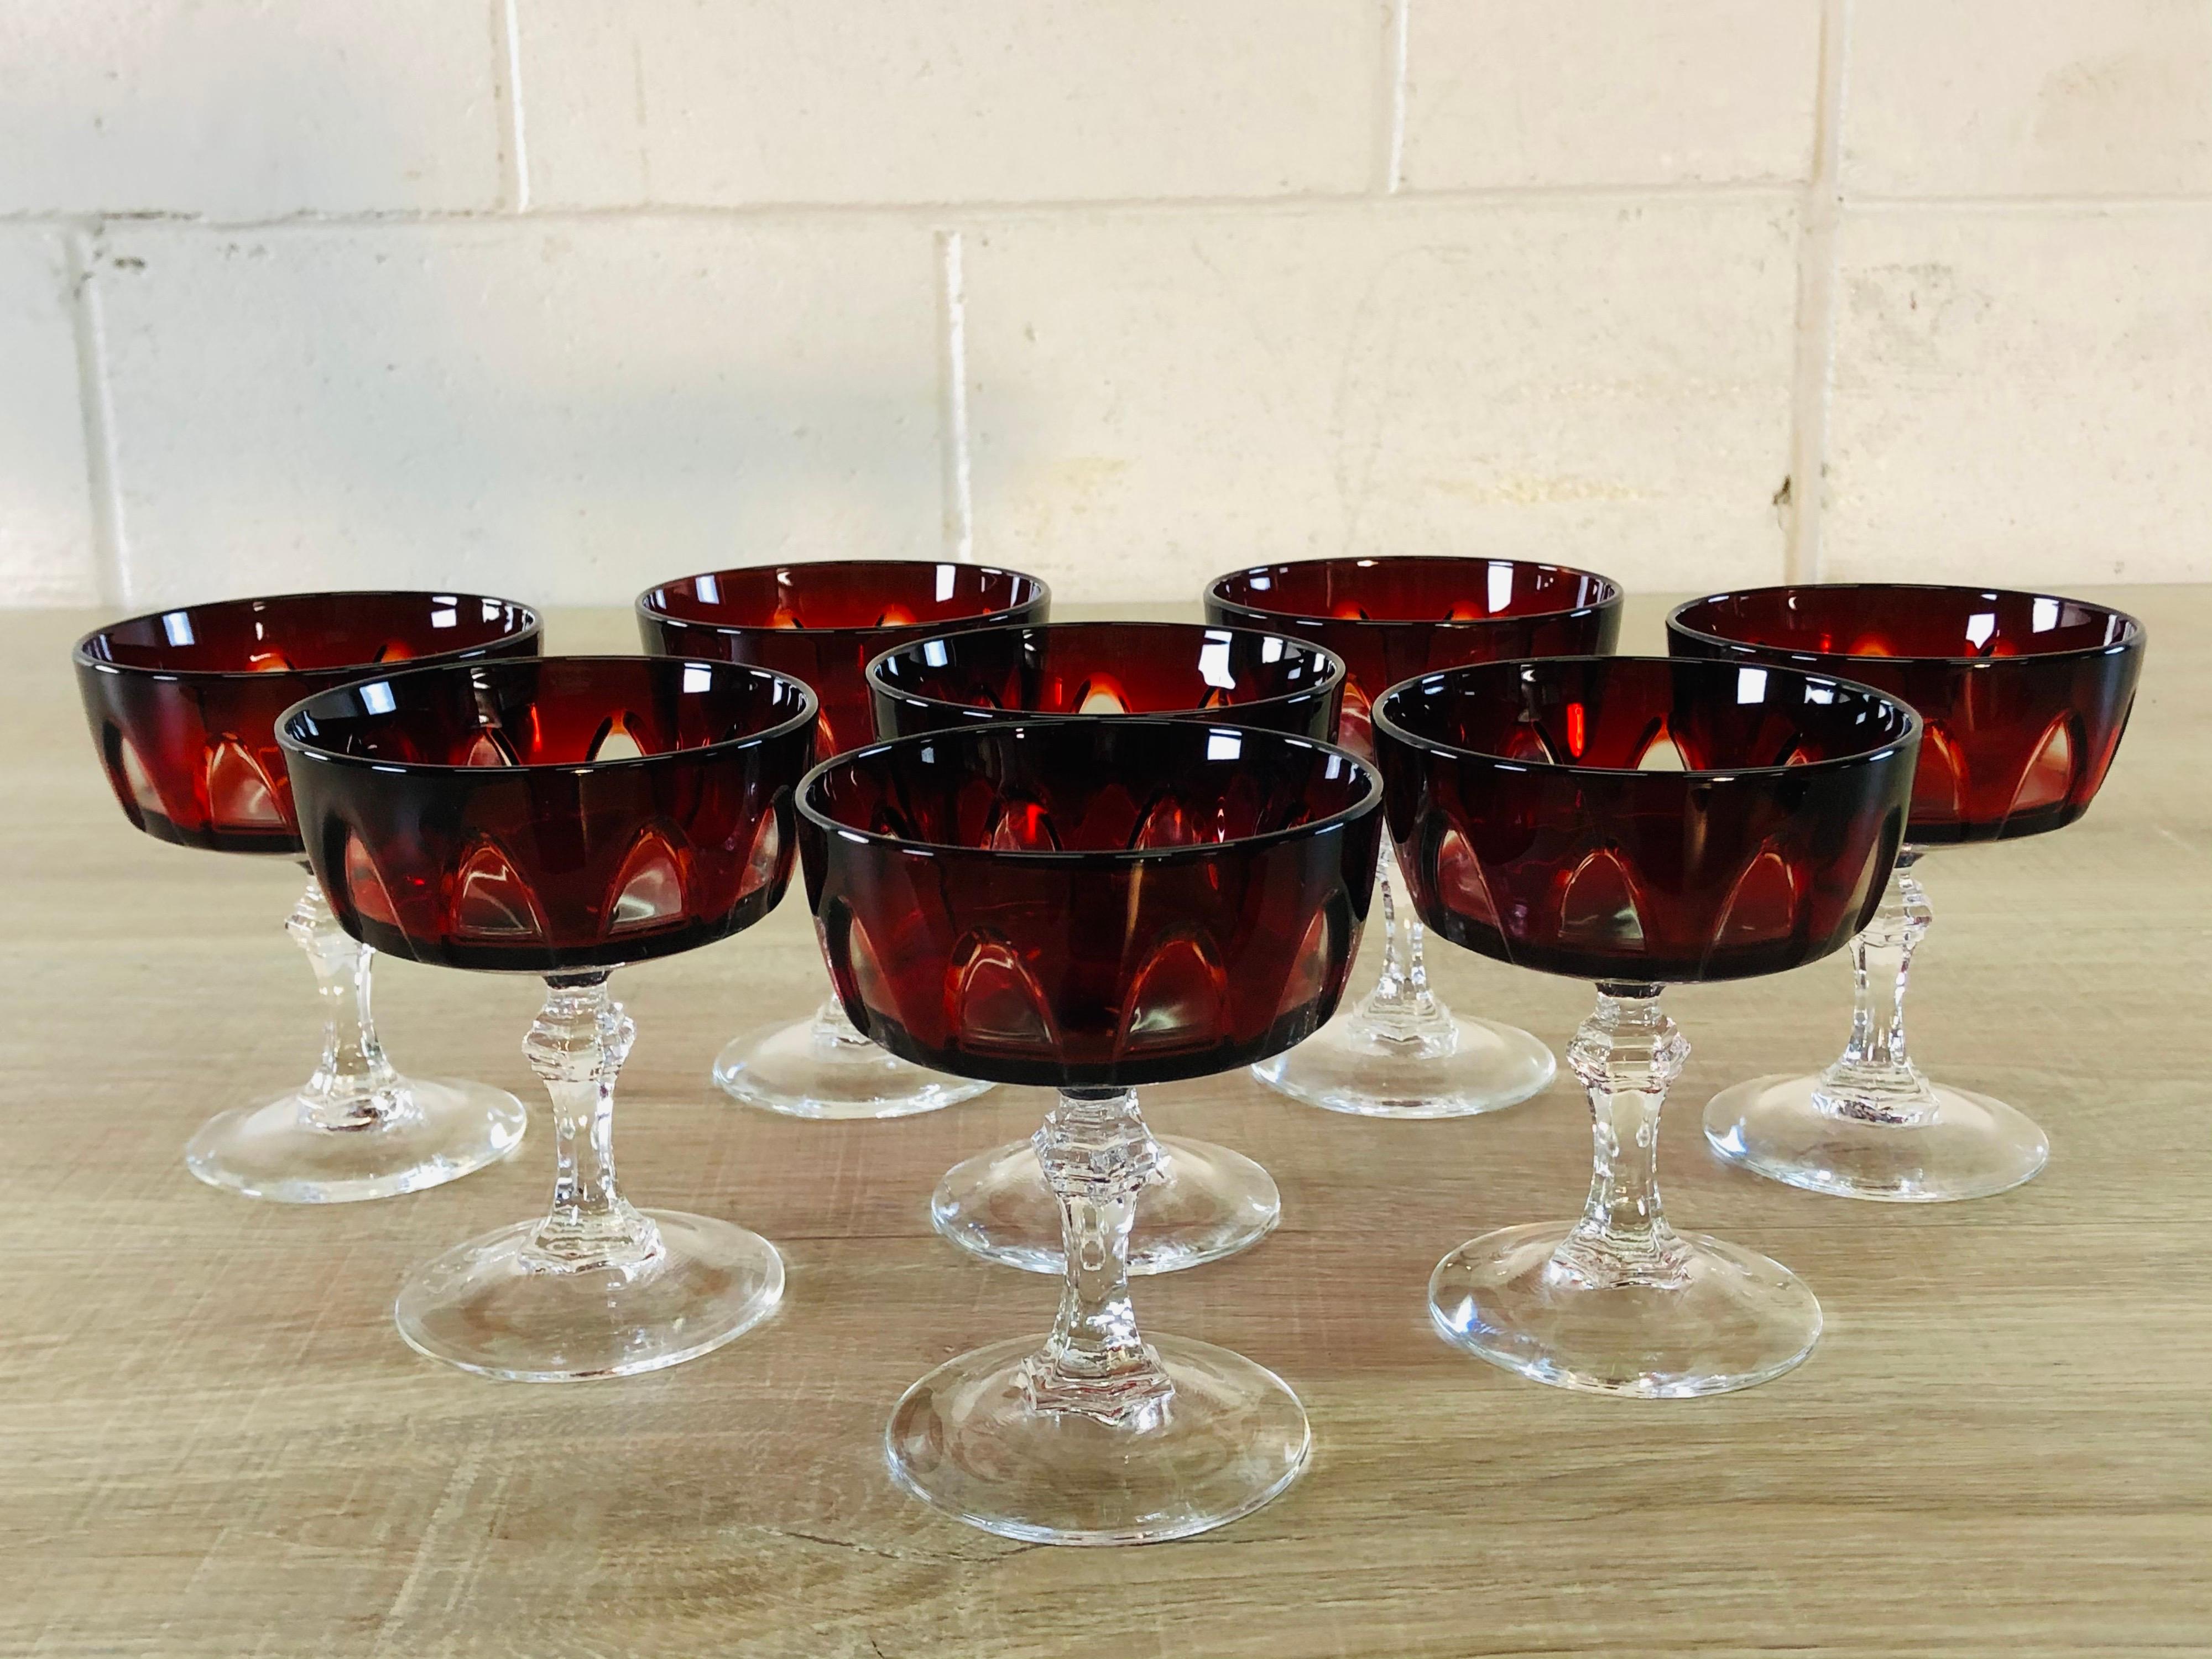 Vintage 1960s set of 8 French glass red and clear arched style coupe stems. Marked France.